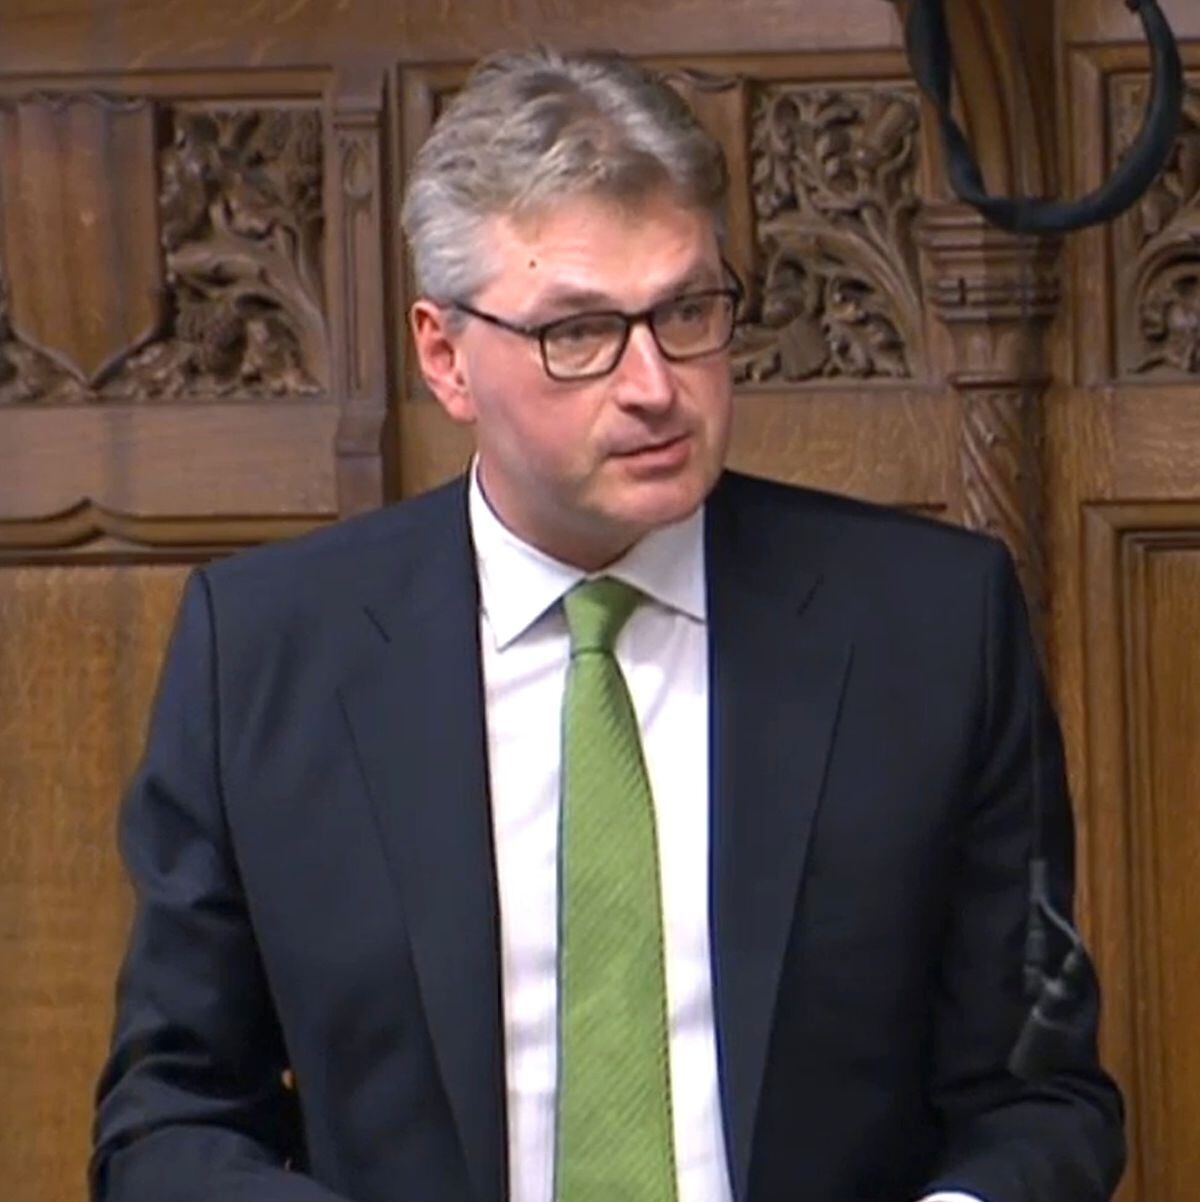 Shrewsbury & Atcham Conservative MP Daniel Kawczynski when he made his apology in the House of Commons